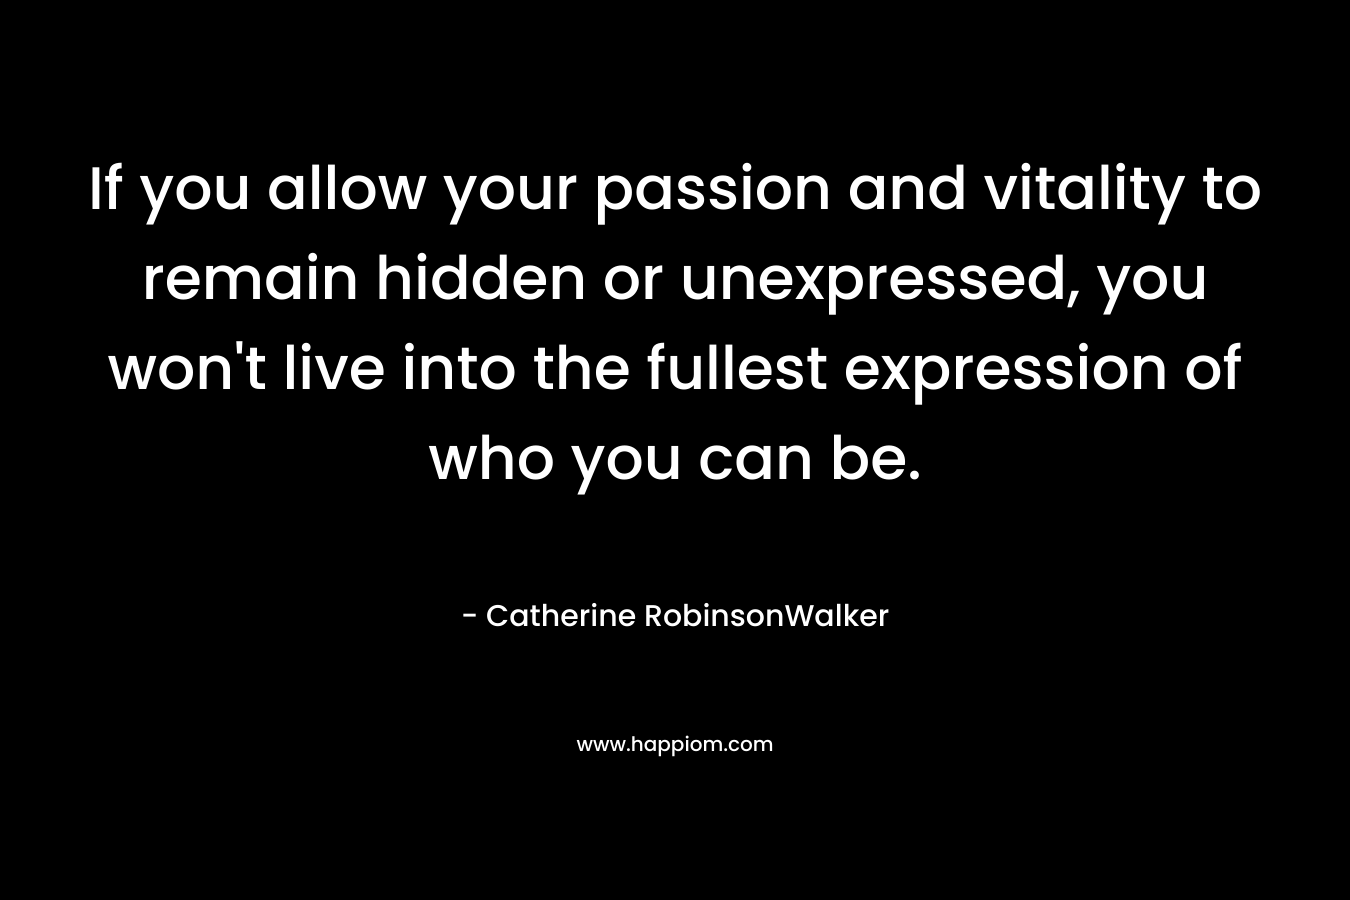 If you allow your passion and vitality to remain hidden or unexpressed, you won’t live into the fullest expression of who you can be. – Catherine RobinsonWalker